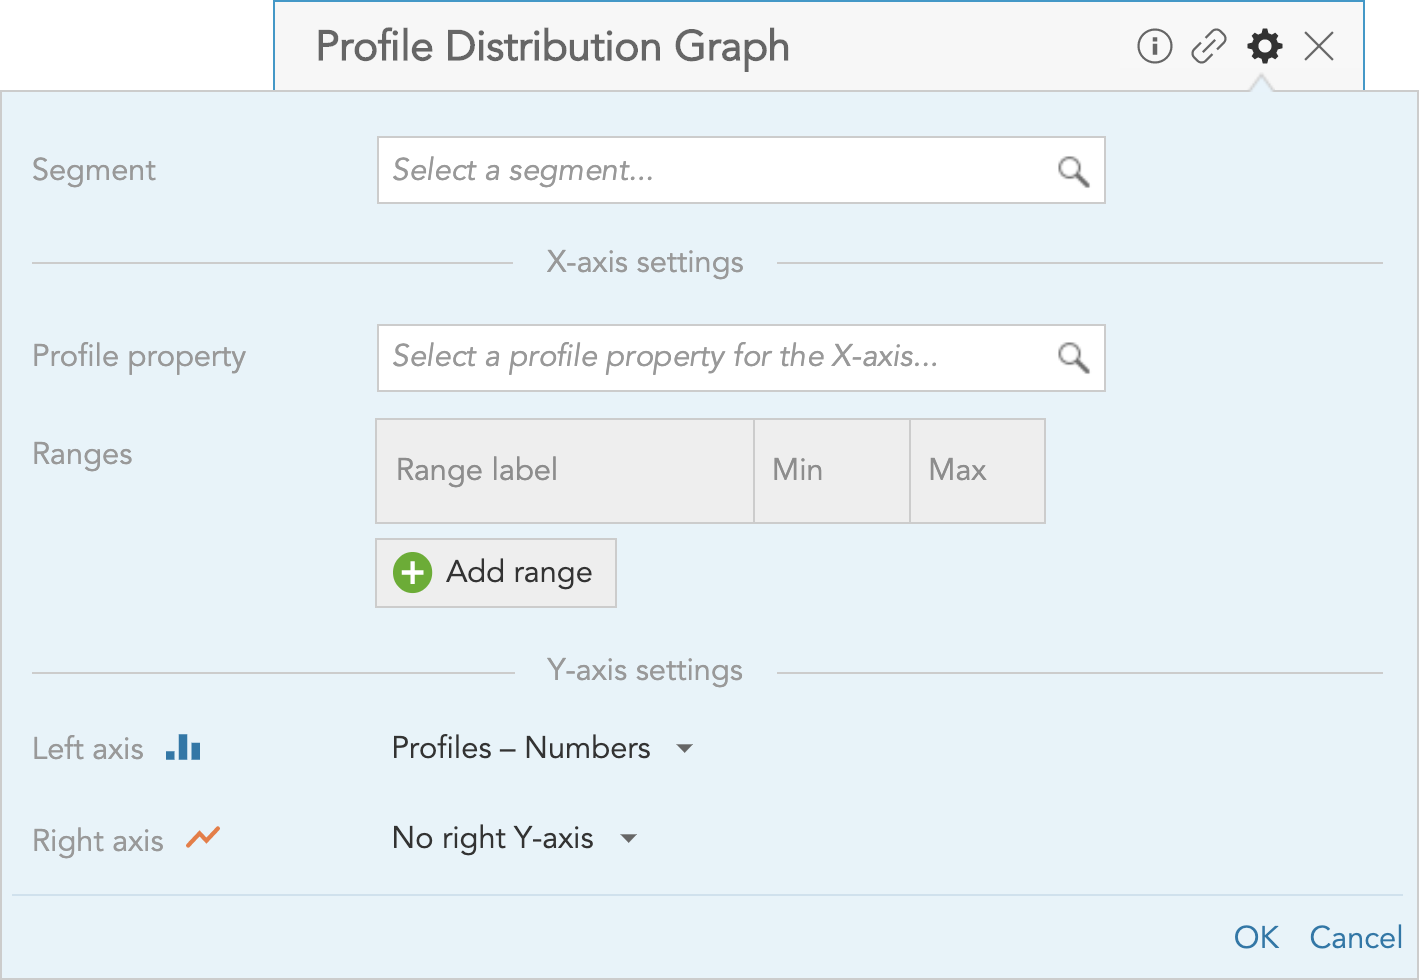 How to set up the Profile Distribution Graph insight in BlueConic to measure and visualize customer order and transaction data